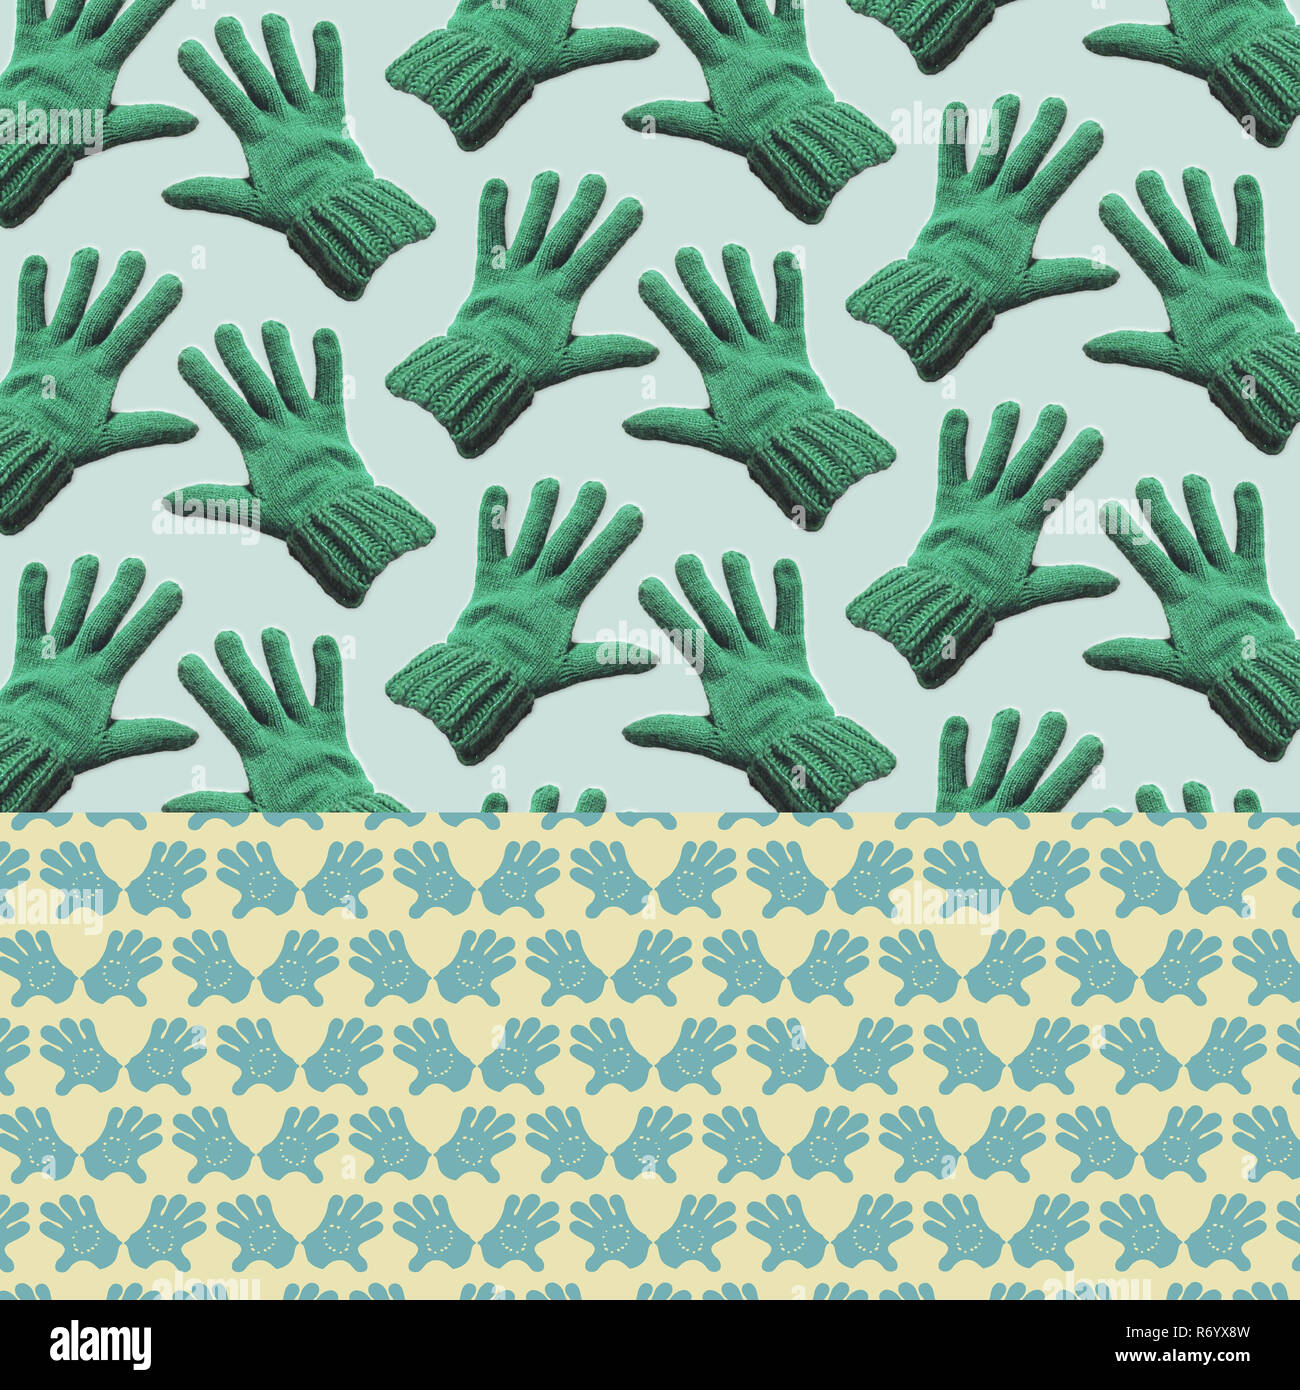 Patterned Background - Photographic Objects Collage  mixed with Hand Drawn Icons - Green Gloves Stock Photo